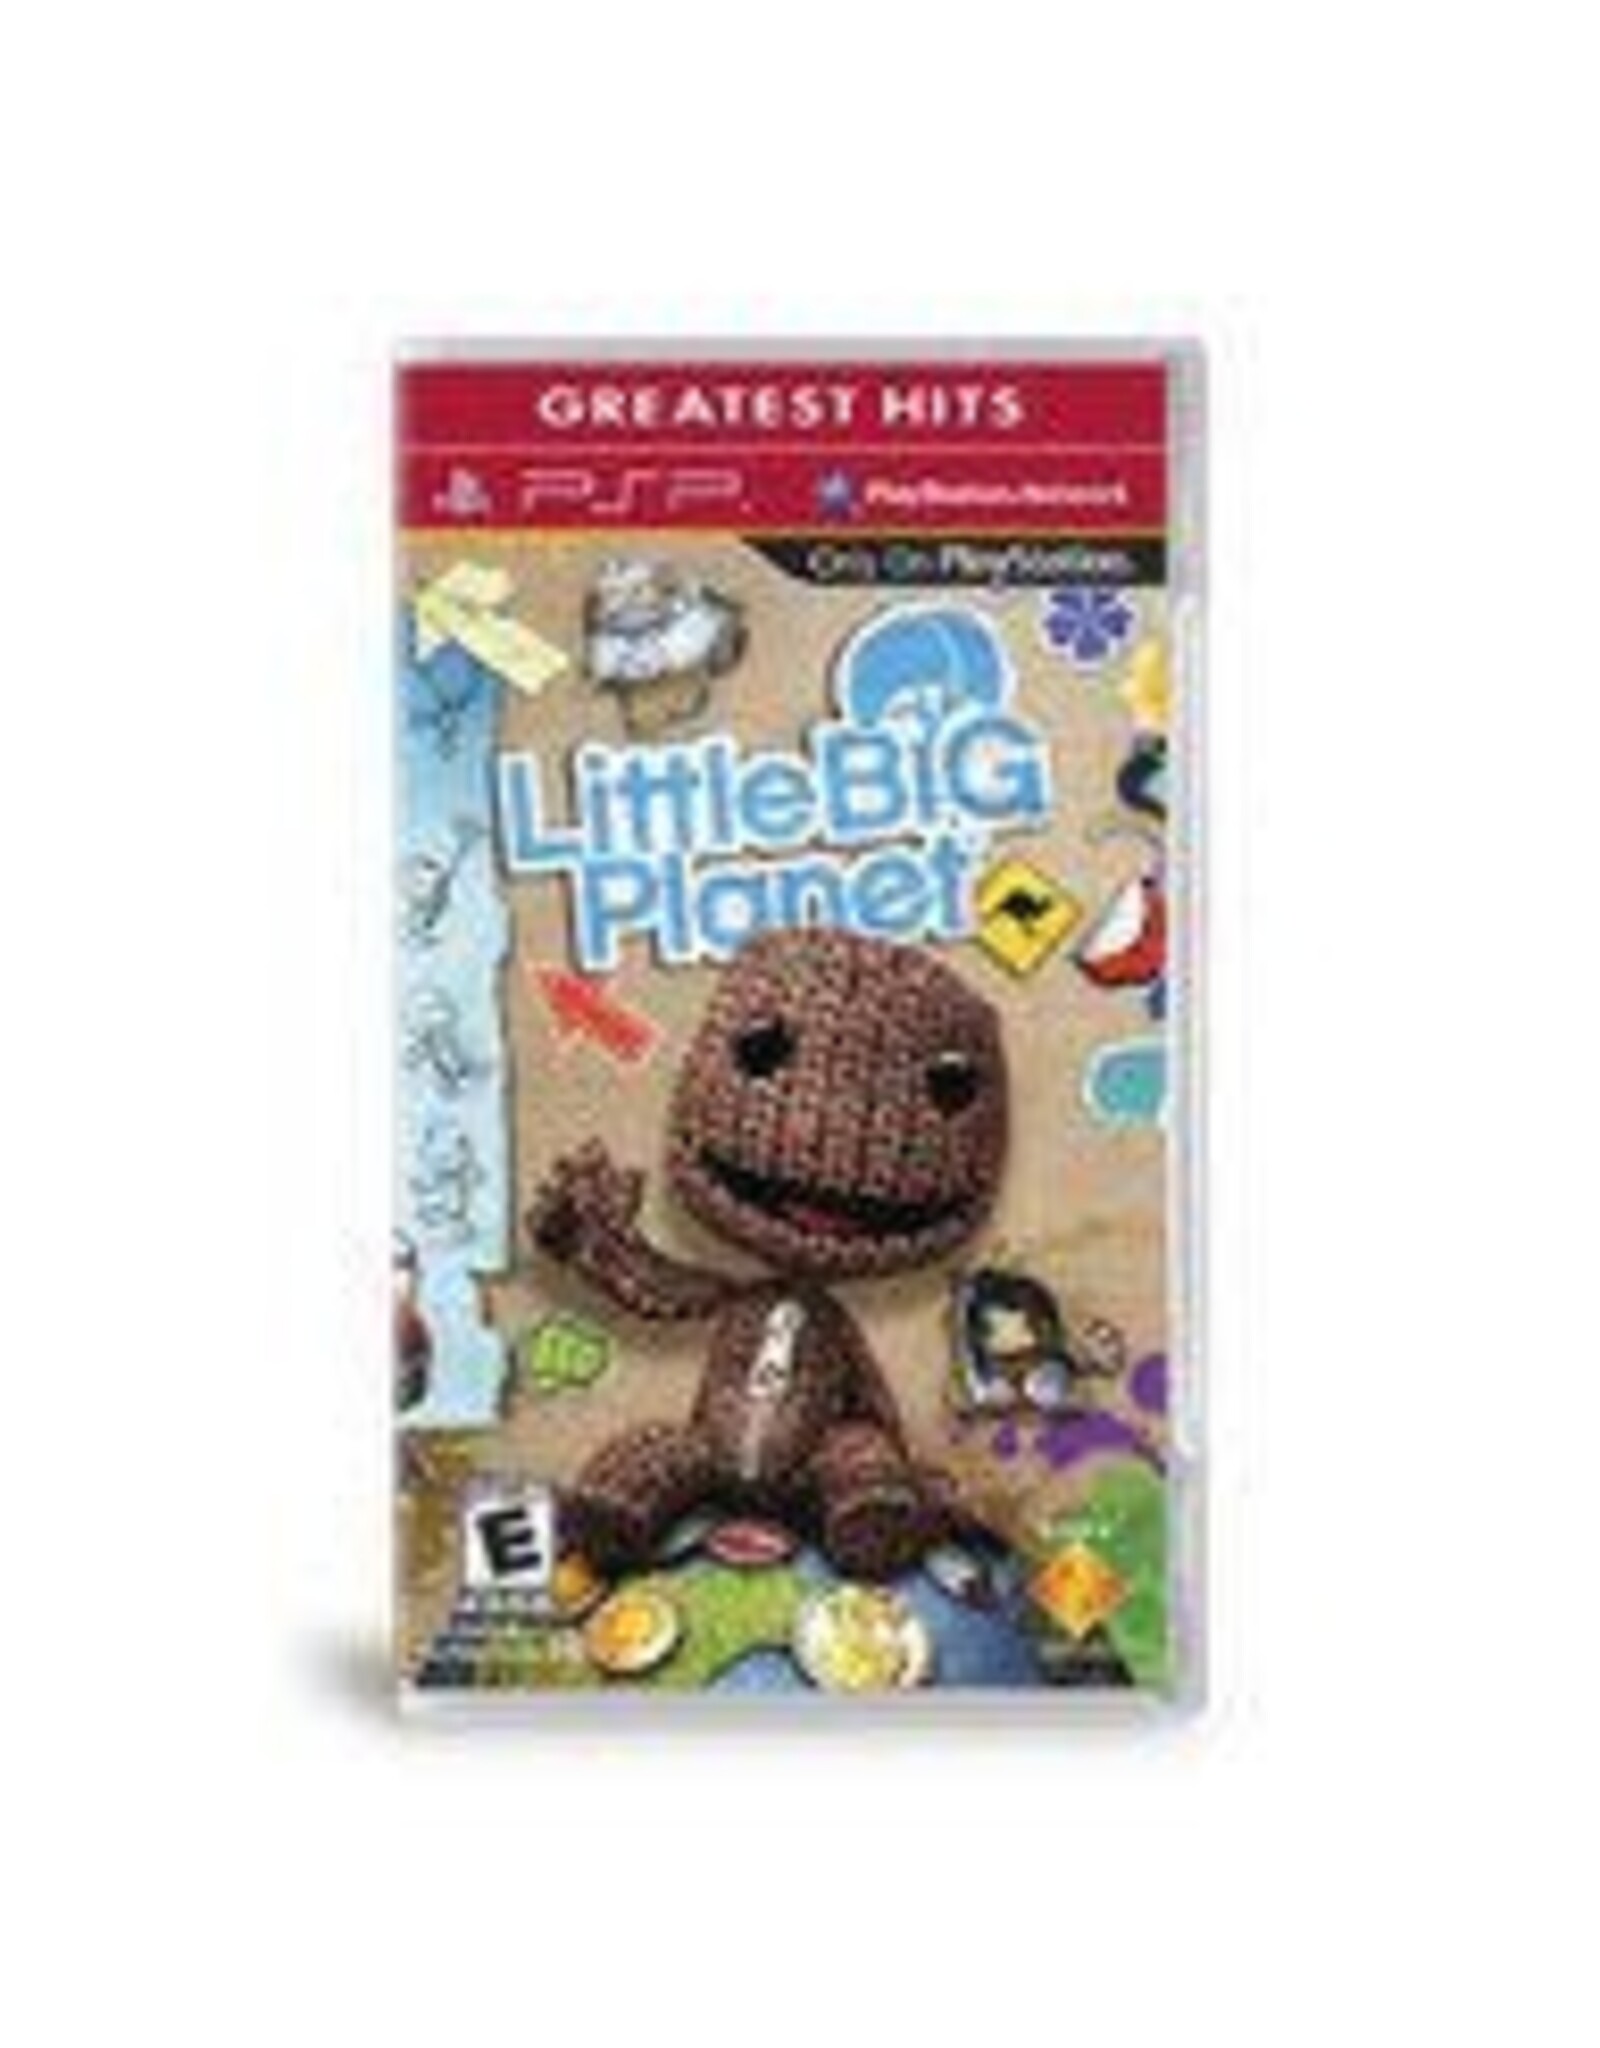 PSP Little Big Planet (Greatest Hits, No Manual)